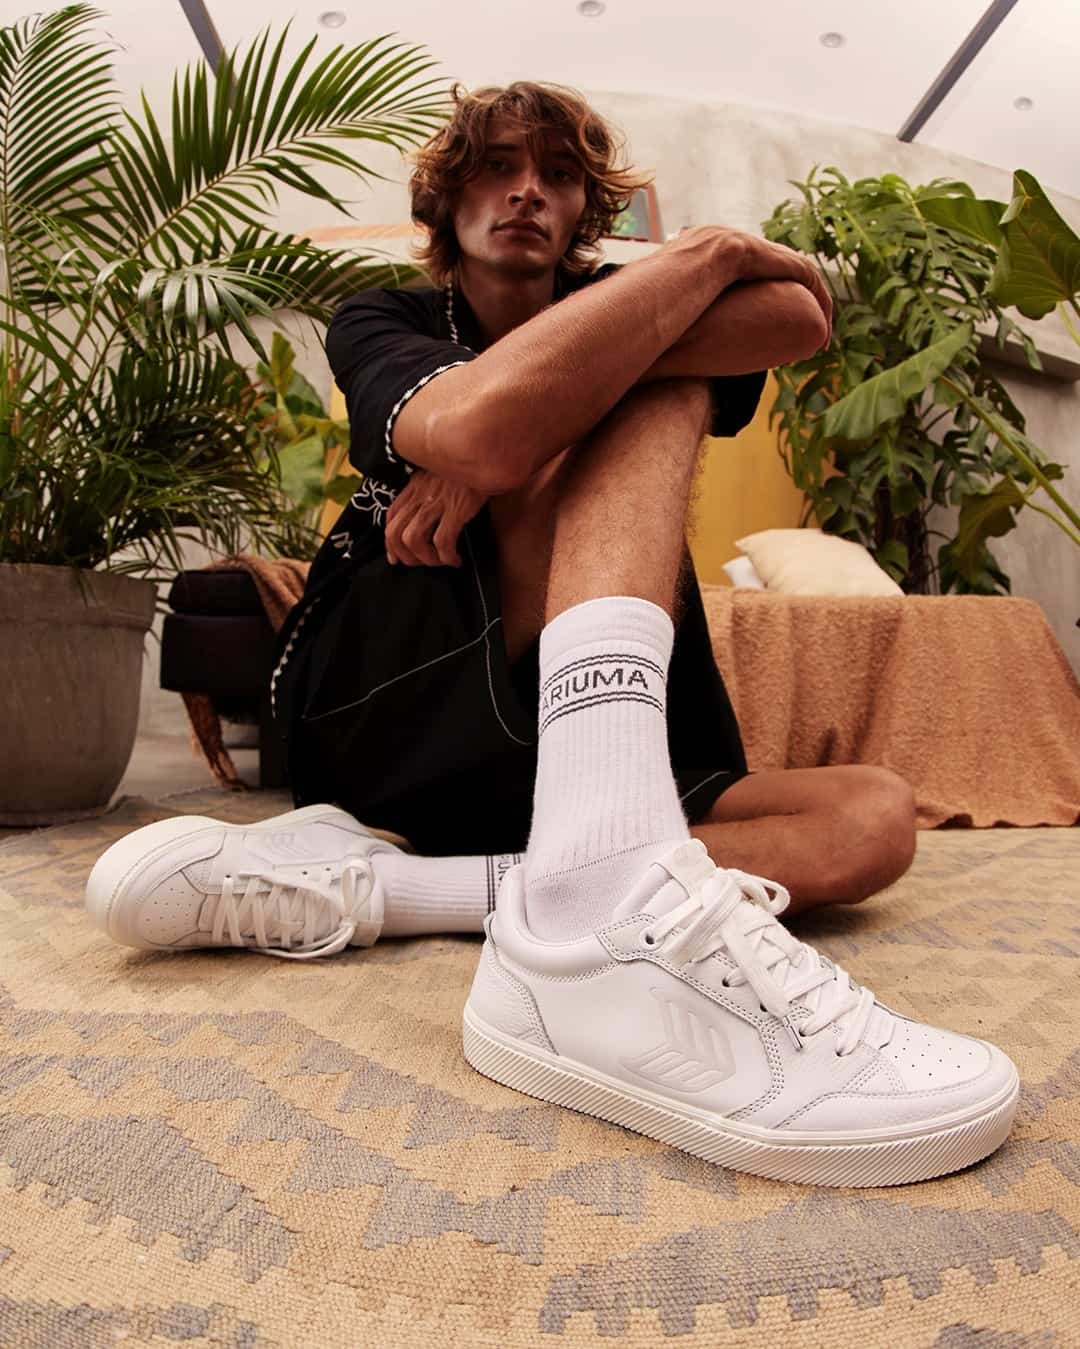 man sitting on the floor wearing a pair of white sneakers